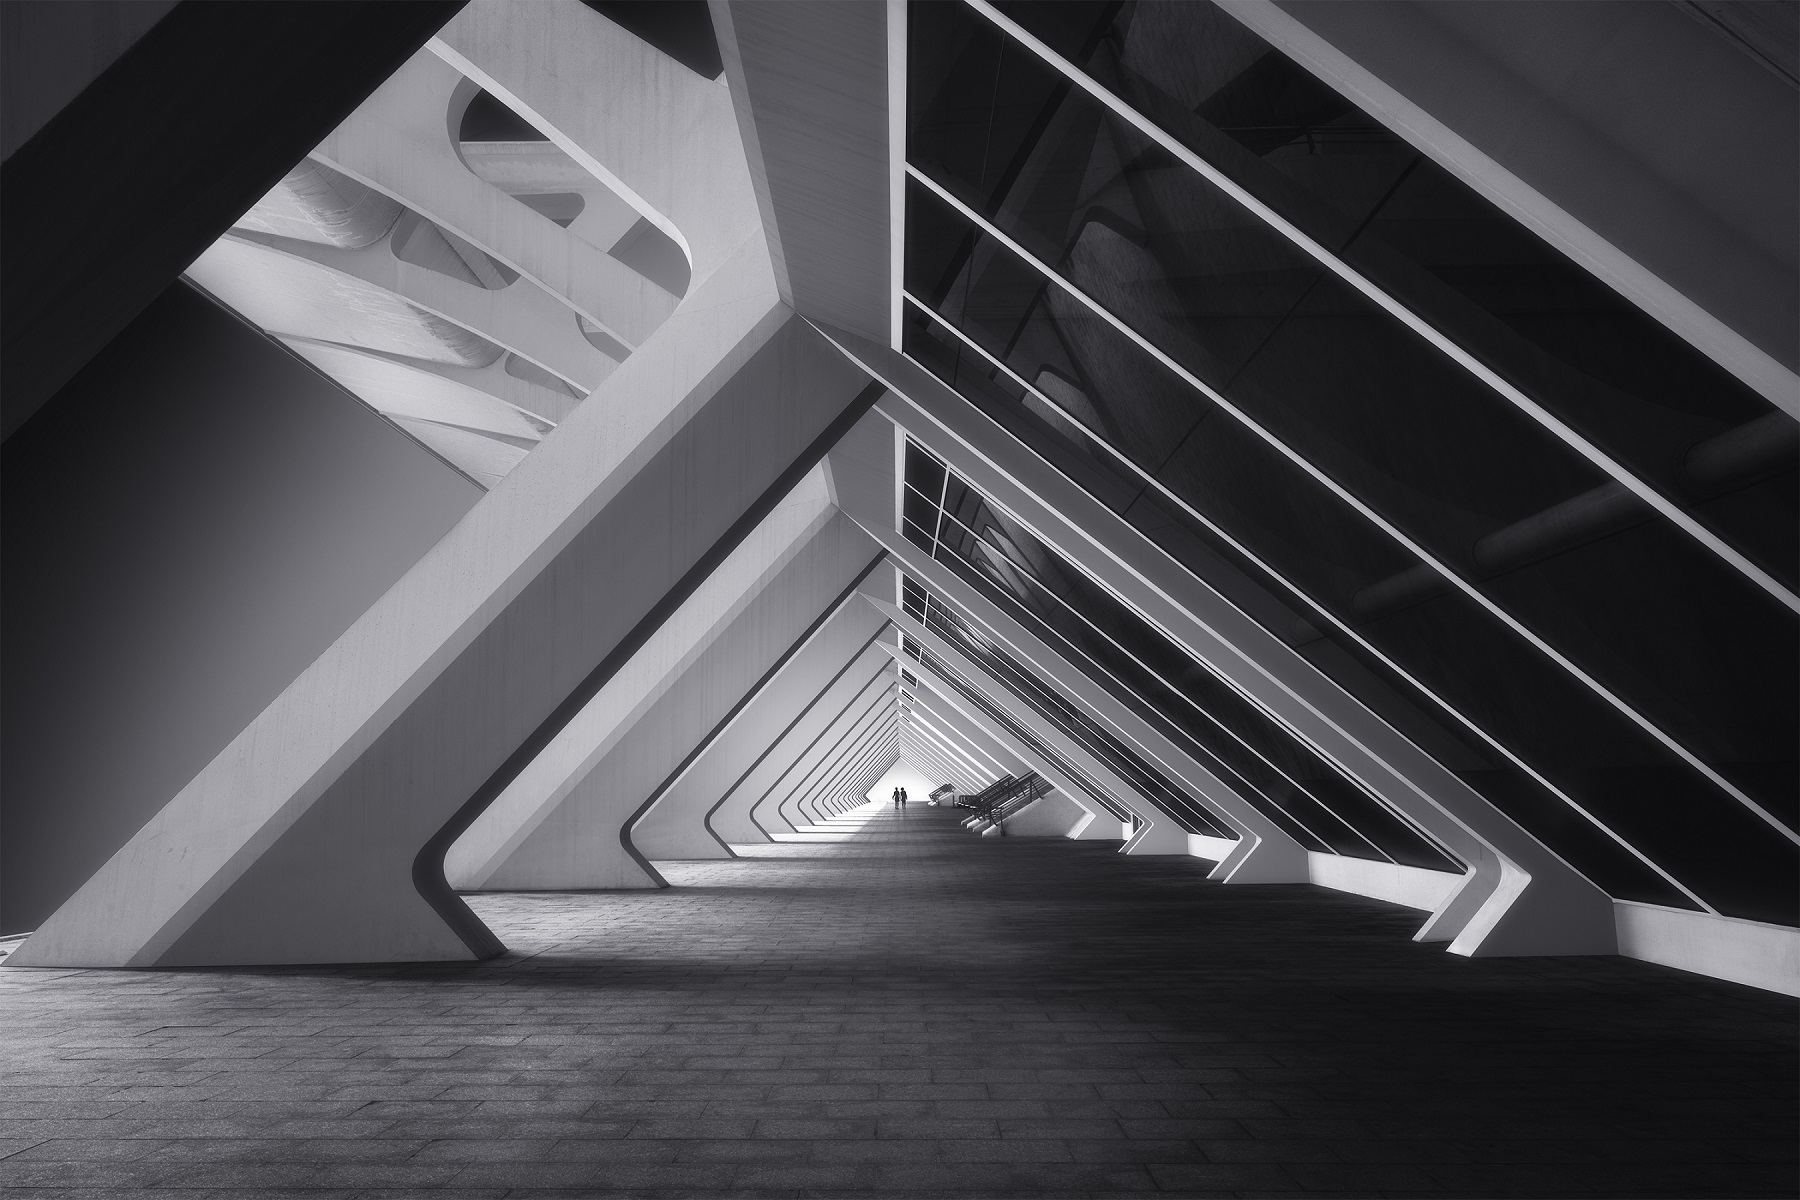 Category Architecture photo winner - Hector Ballester Ballester - A light at the end of the tunnel